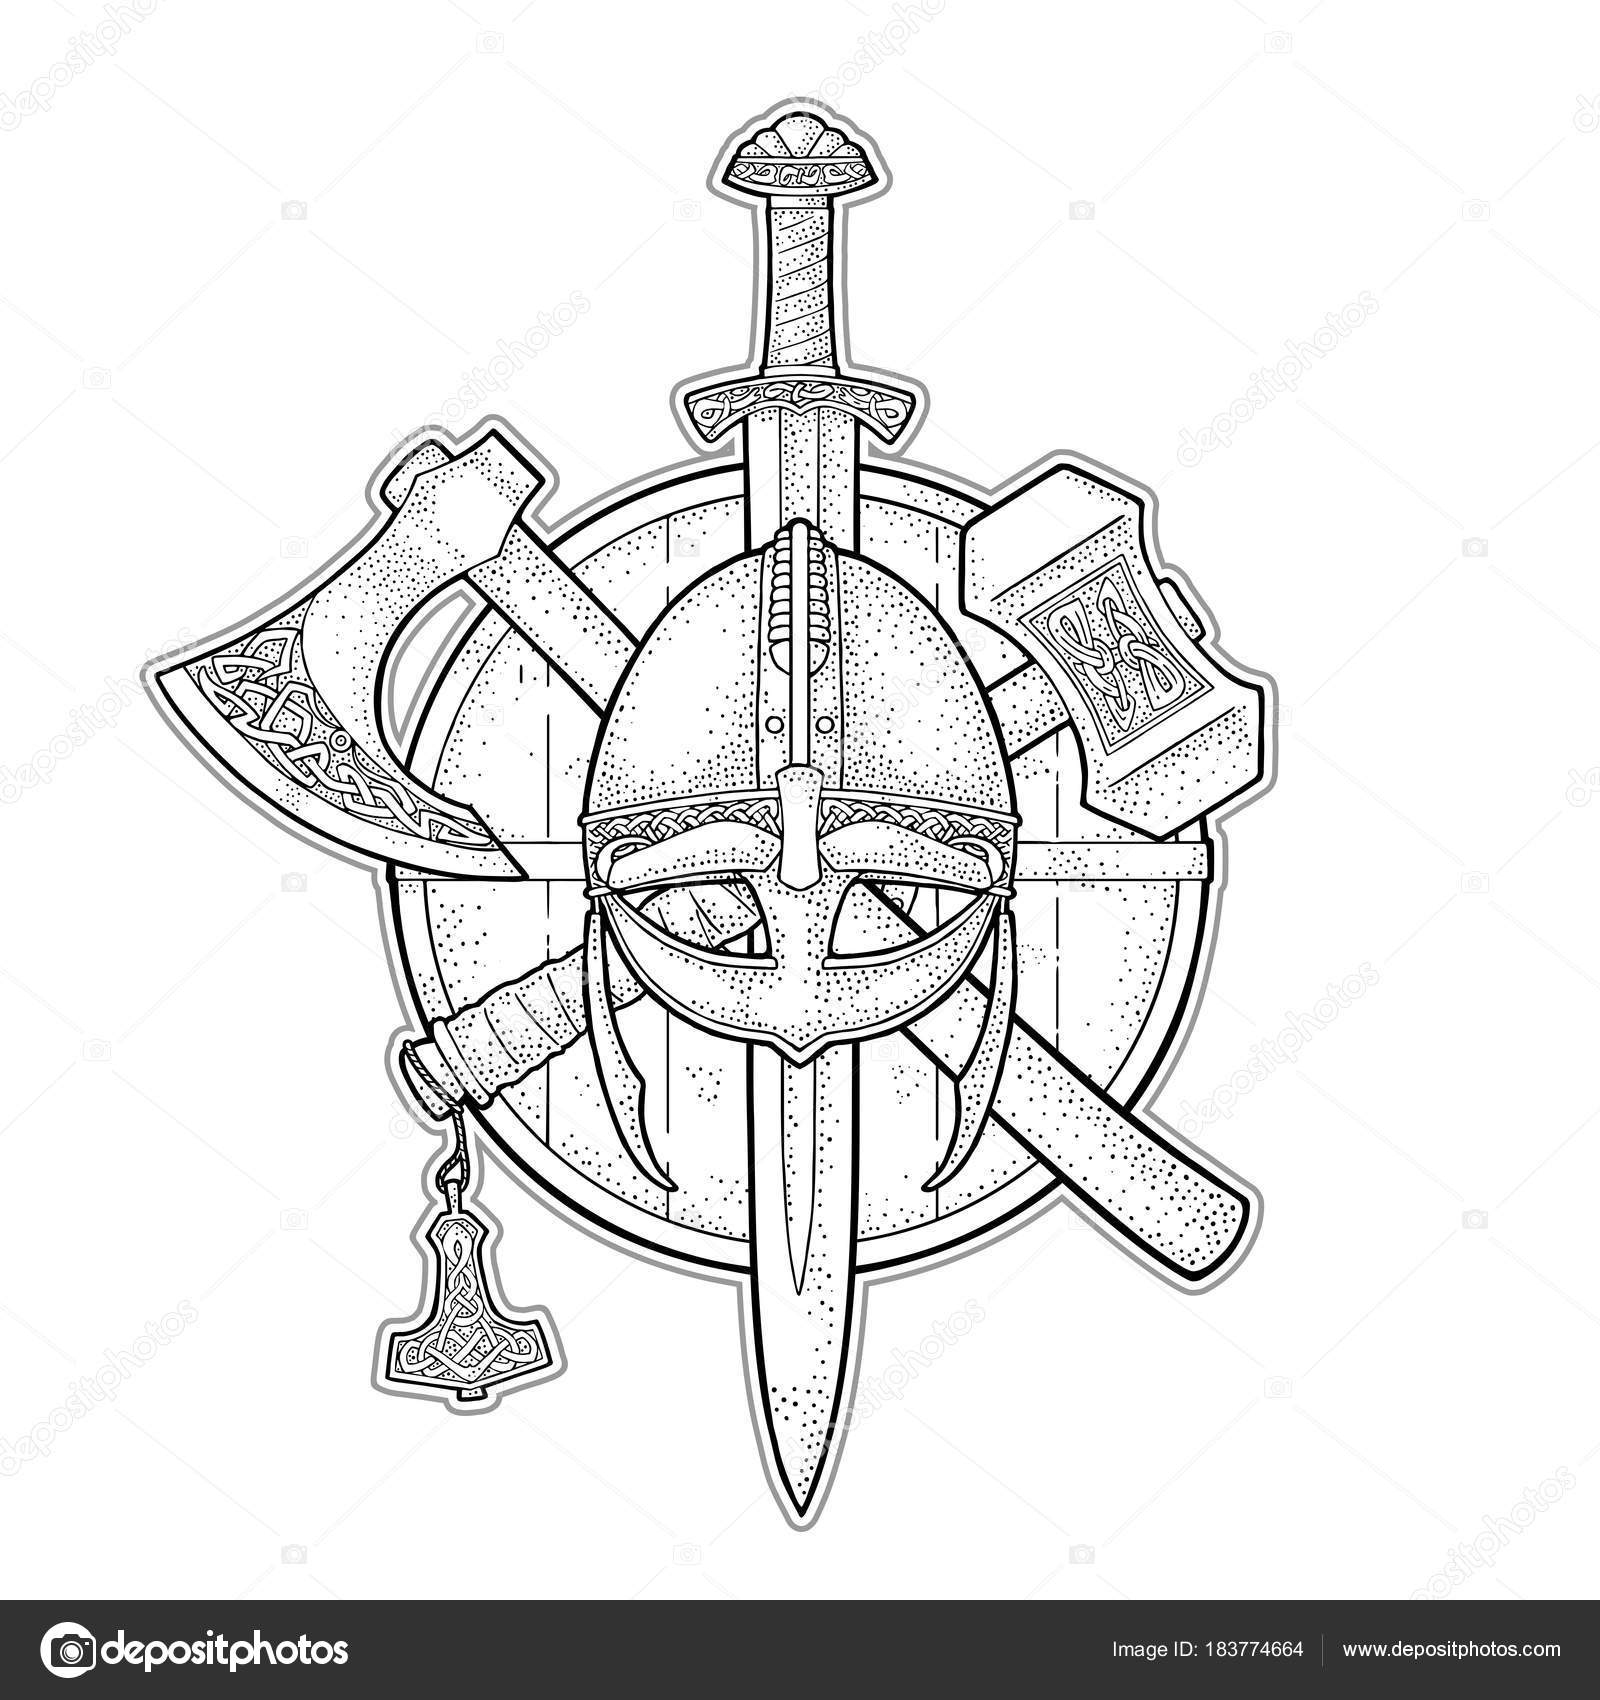 Crossed swords isolated on white background. Design element for